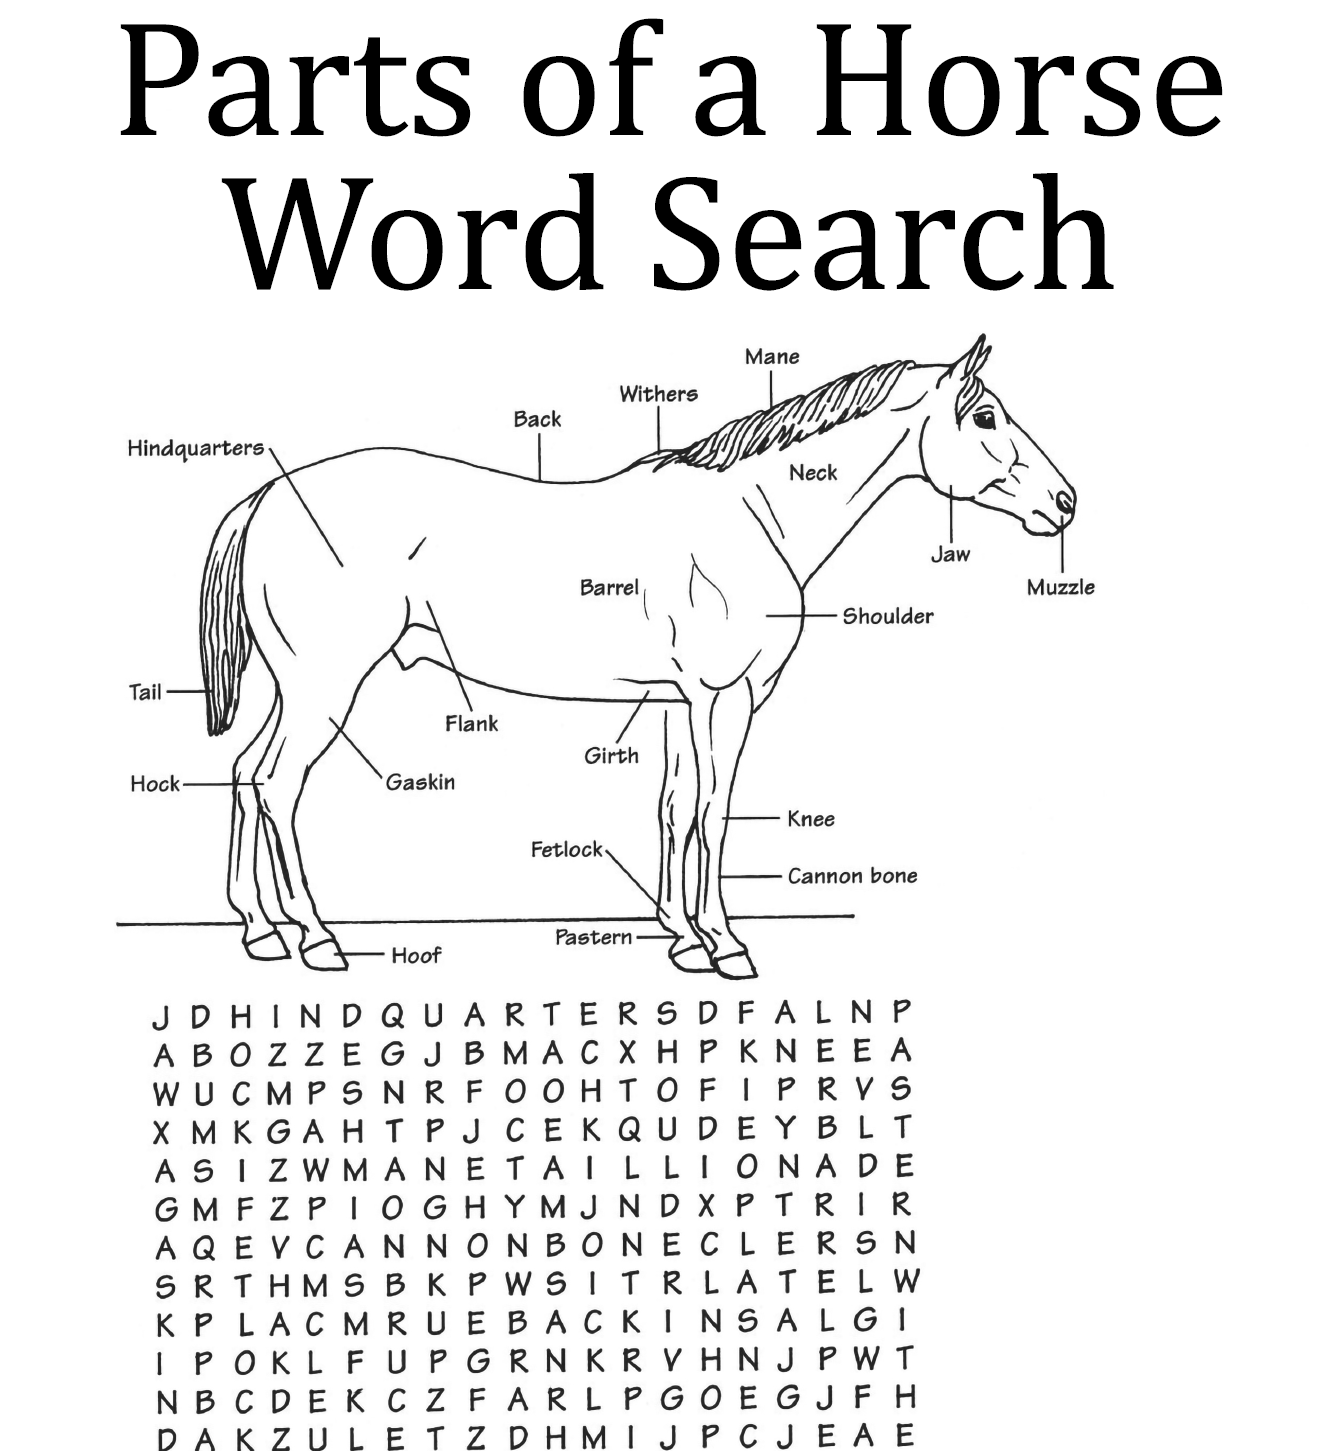 Part of a Horse Word Search